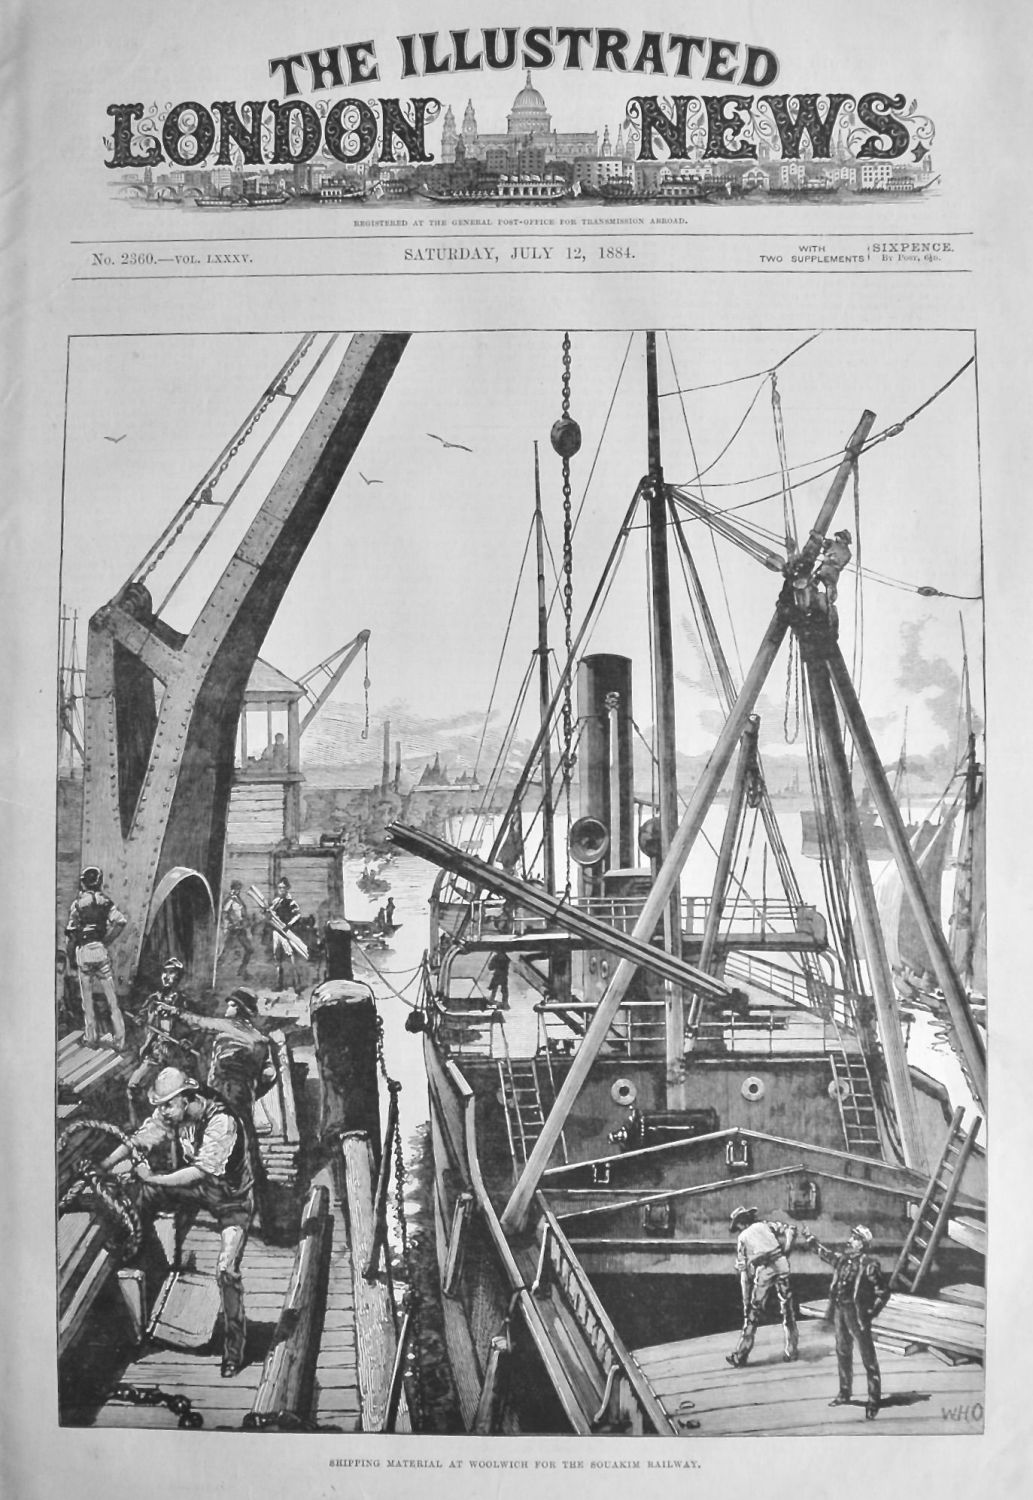 Shipping Material at Woolwich for the Souakim Railway.  1884.